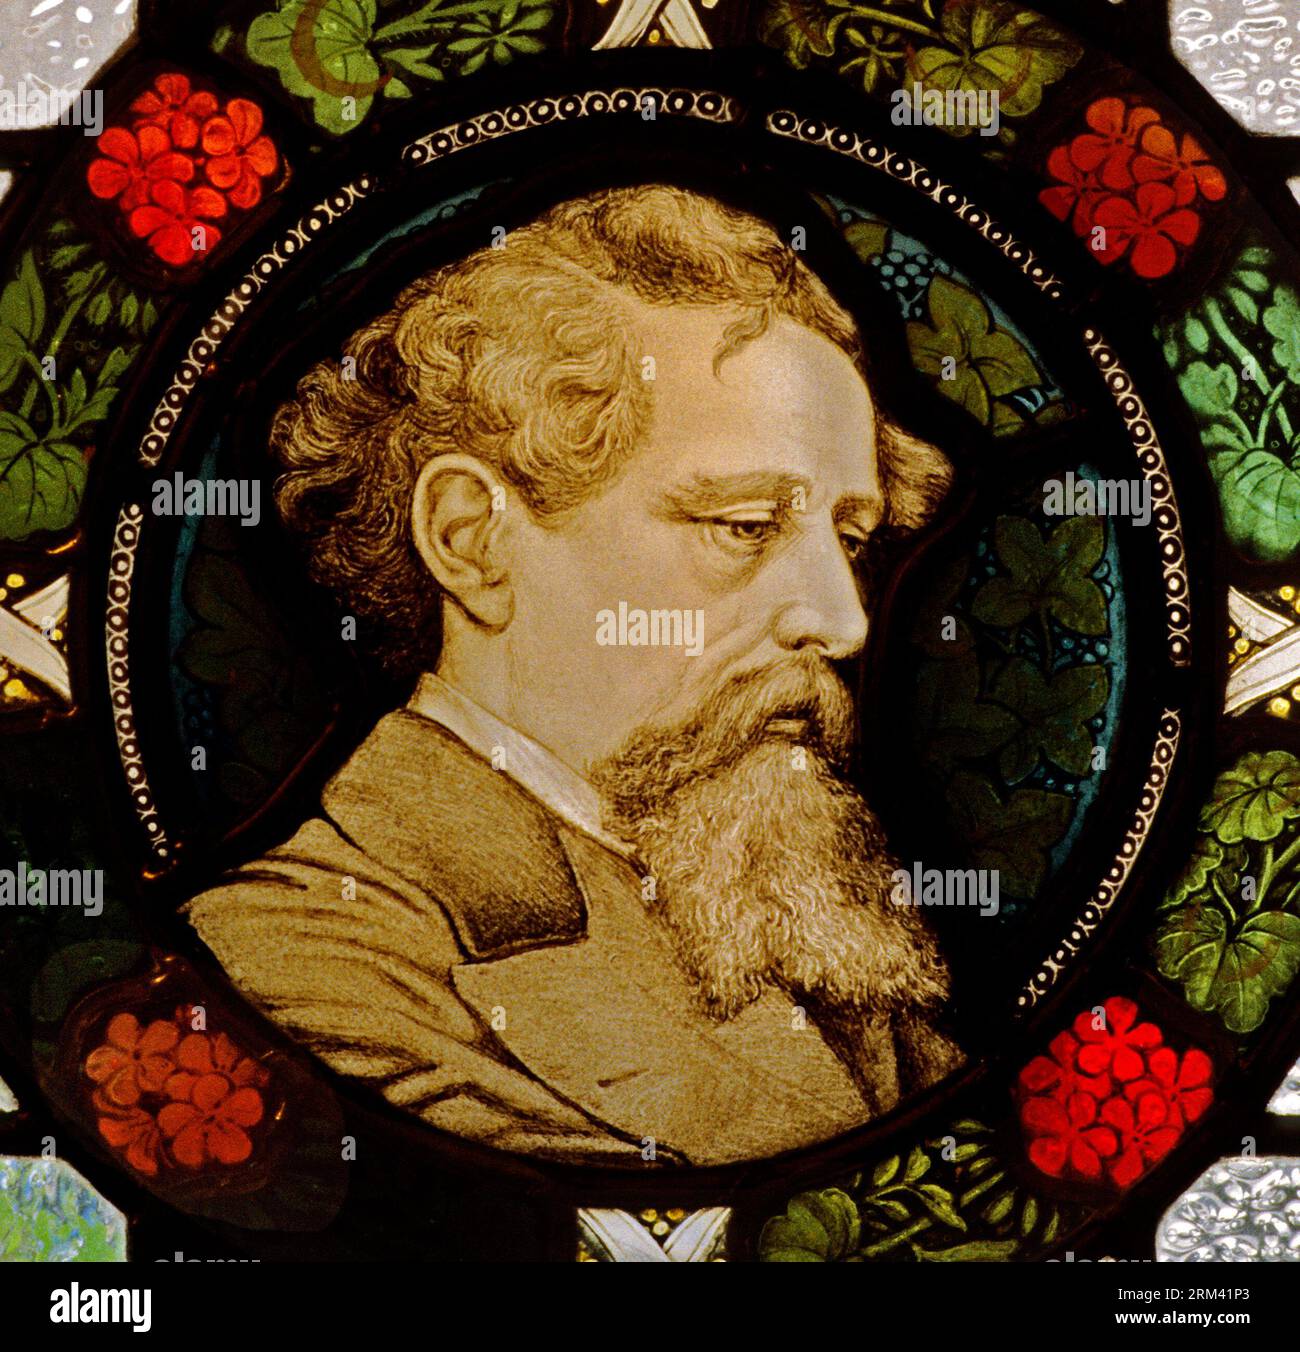 Charles Dickens portrait, stained glass roundel, Dickens House, Doughty Street, London, England, UK Stock Photo